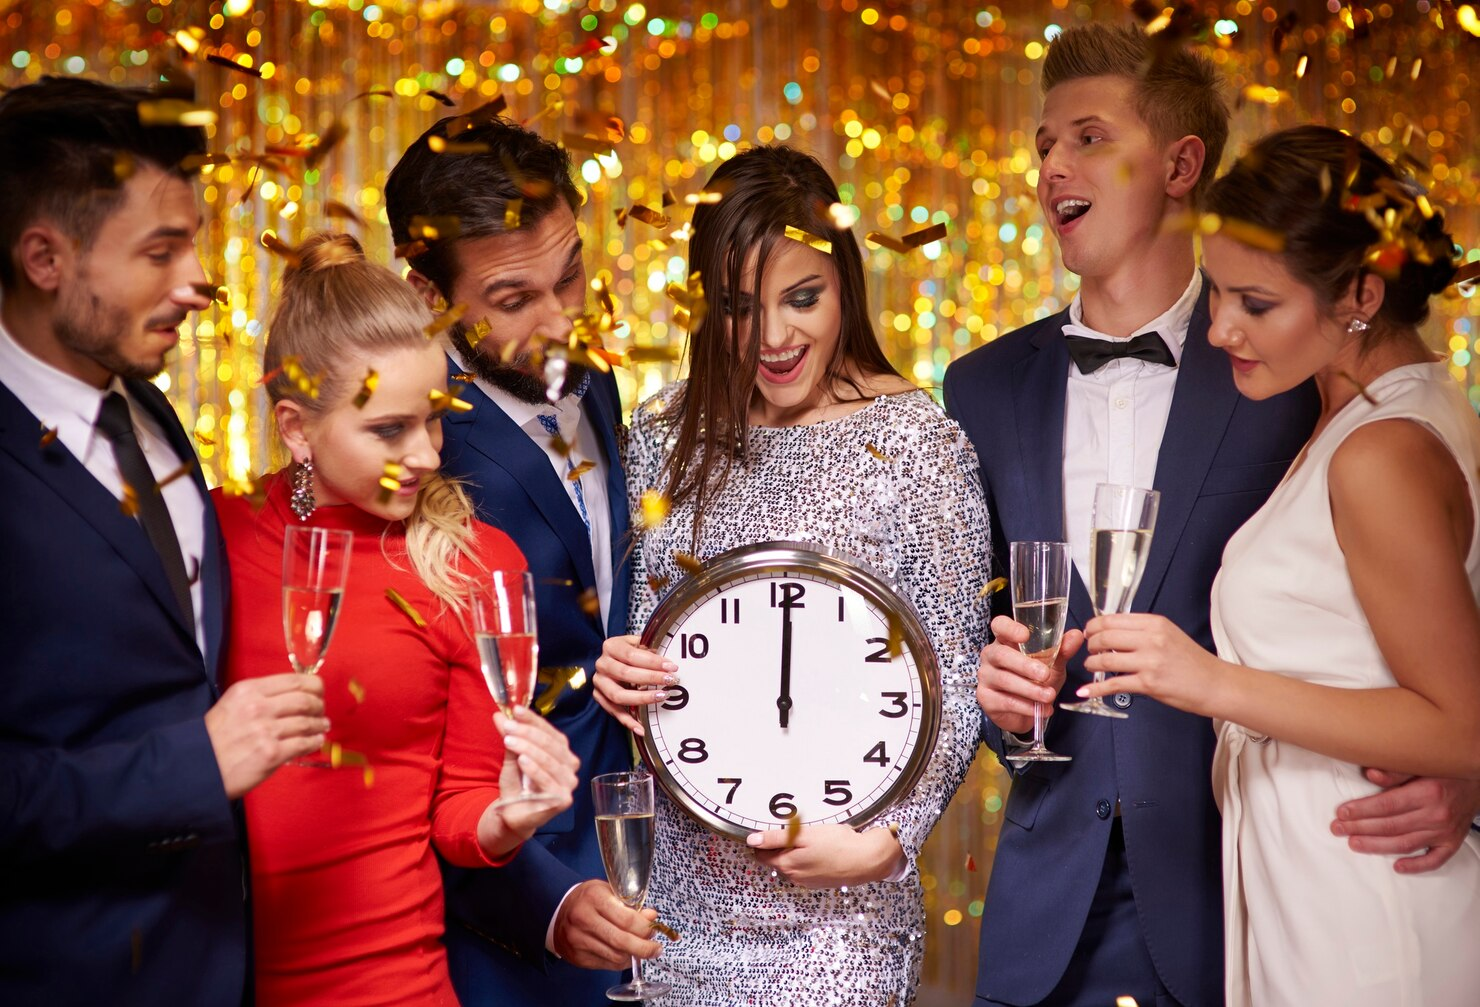 Friends celebrating new year as the clock strikes 12.